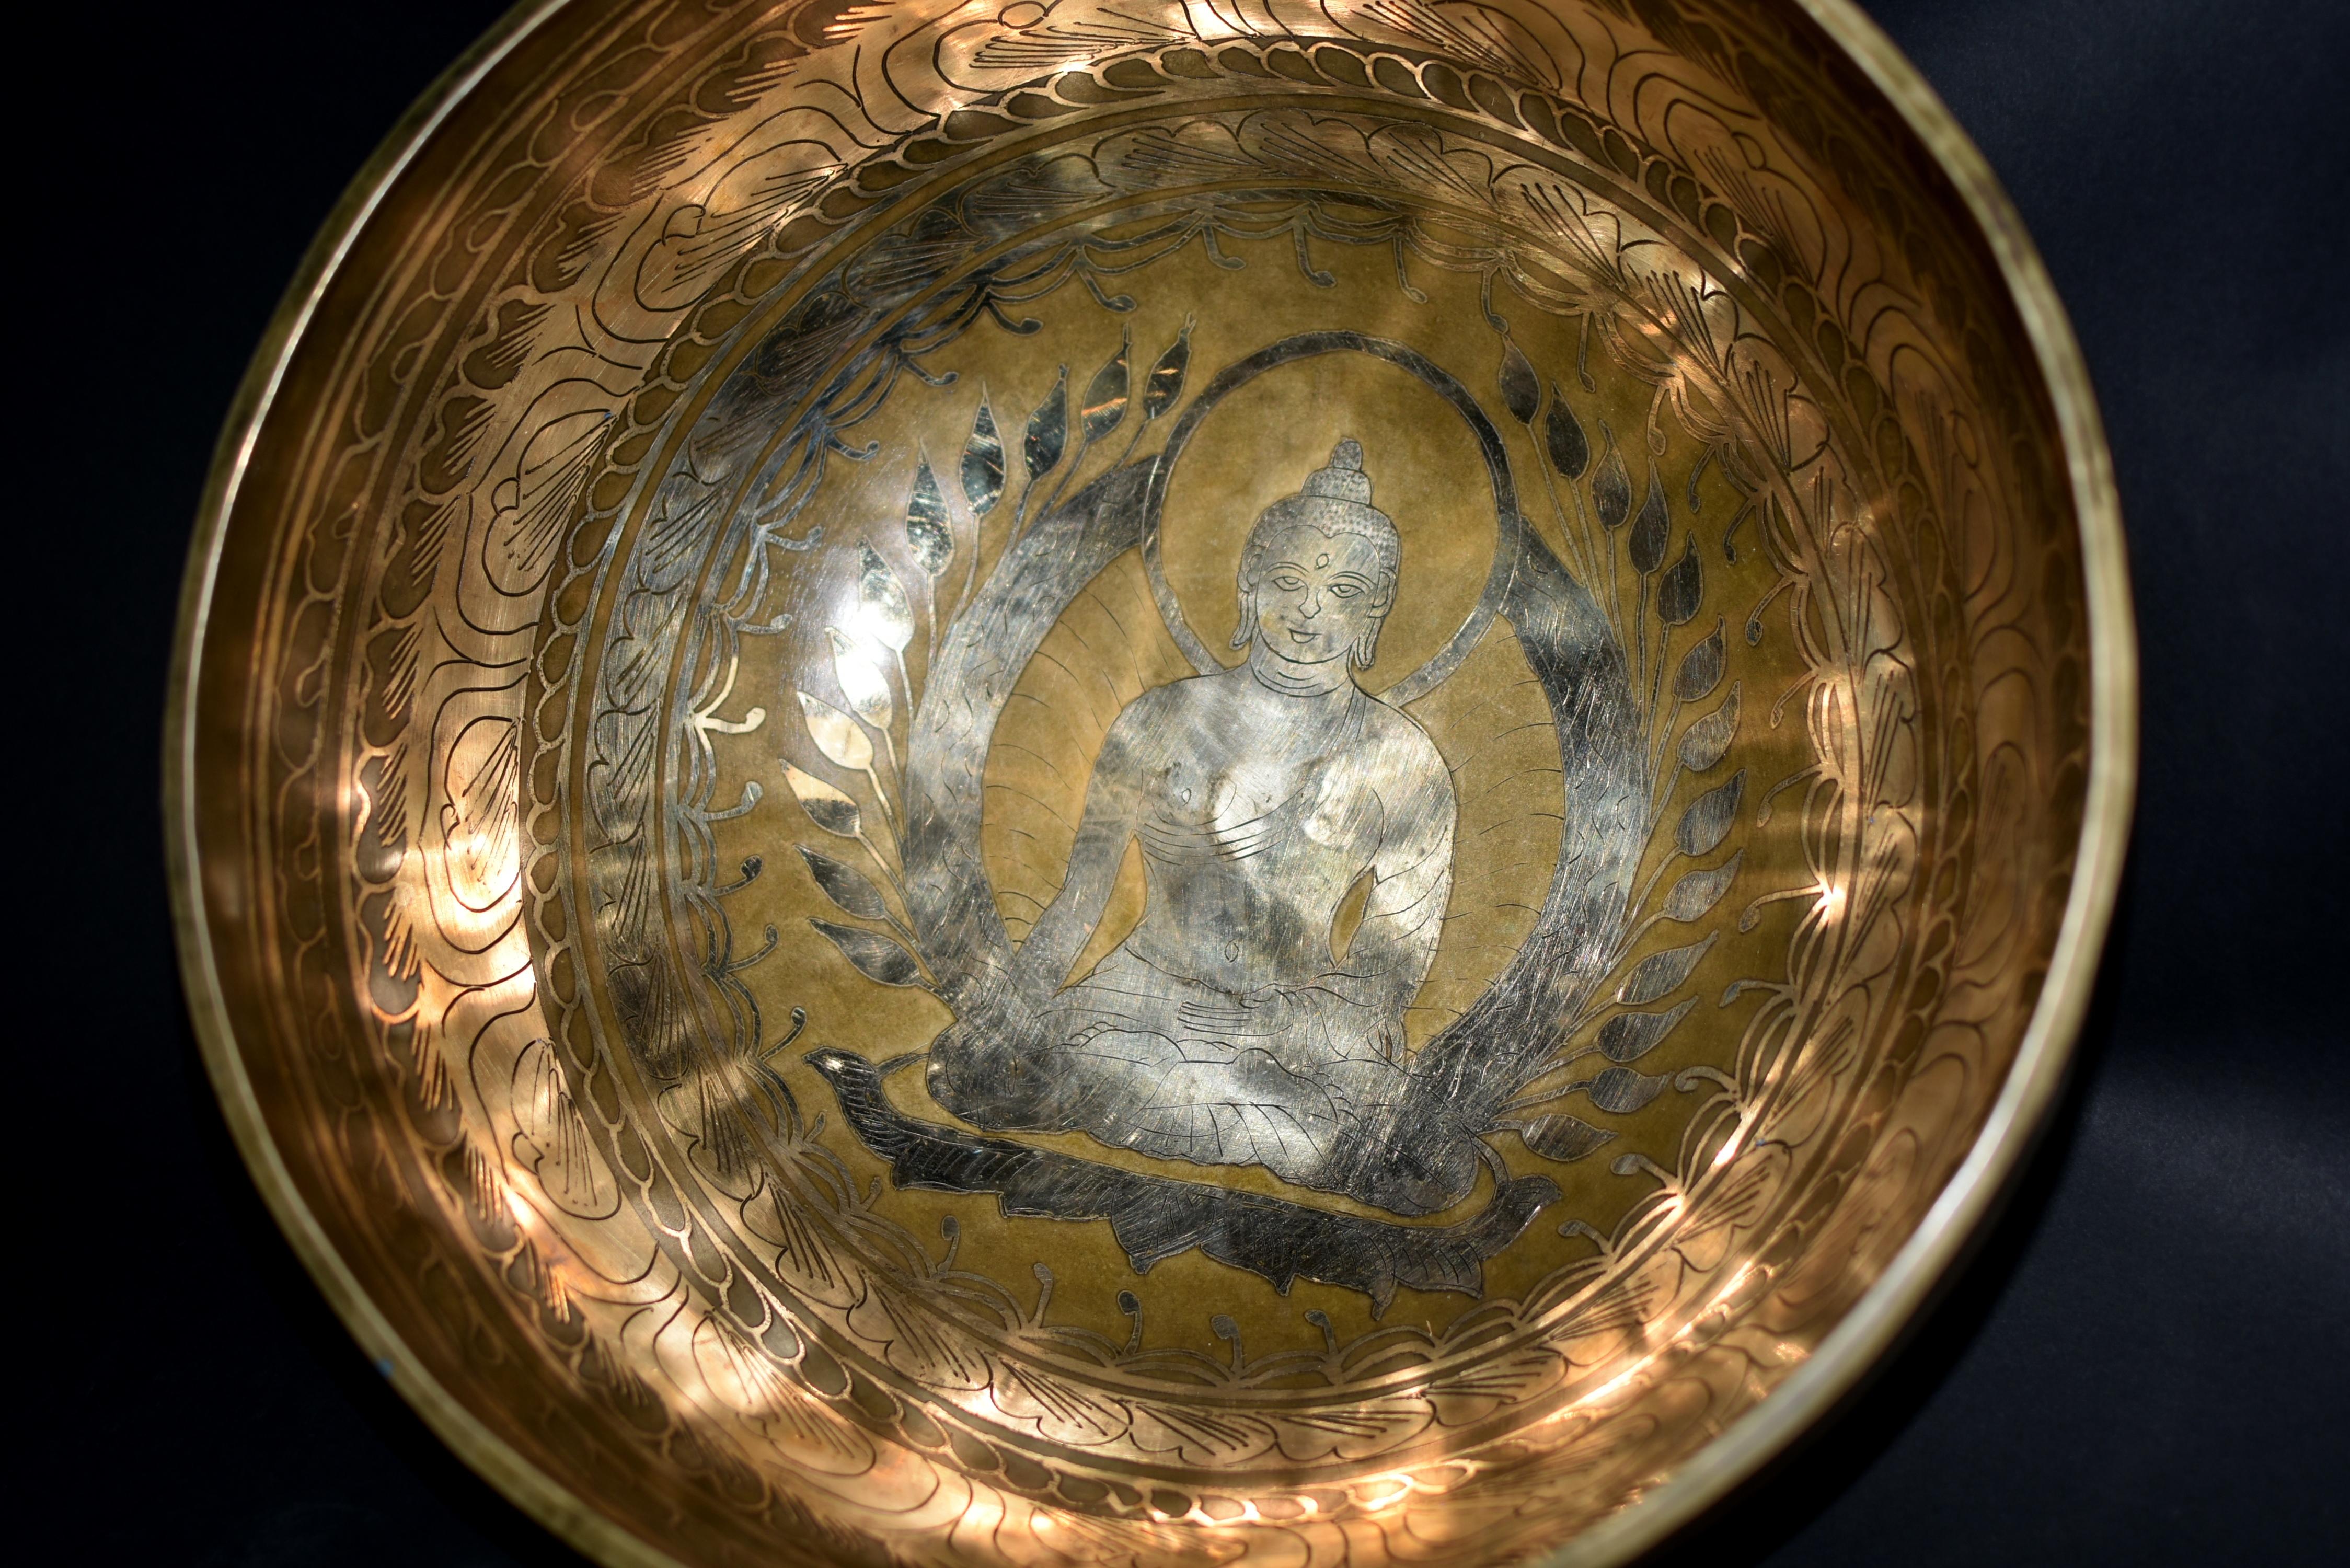 Huge Solid Bronze Singing Bowl with Buddha 13